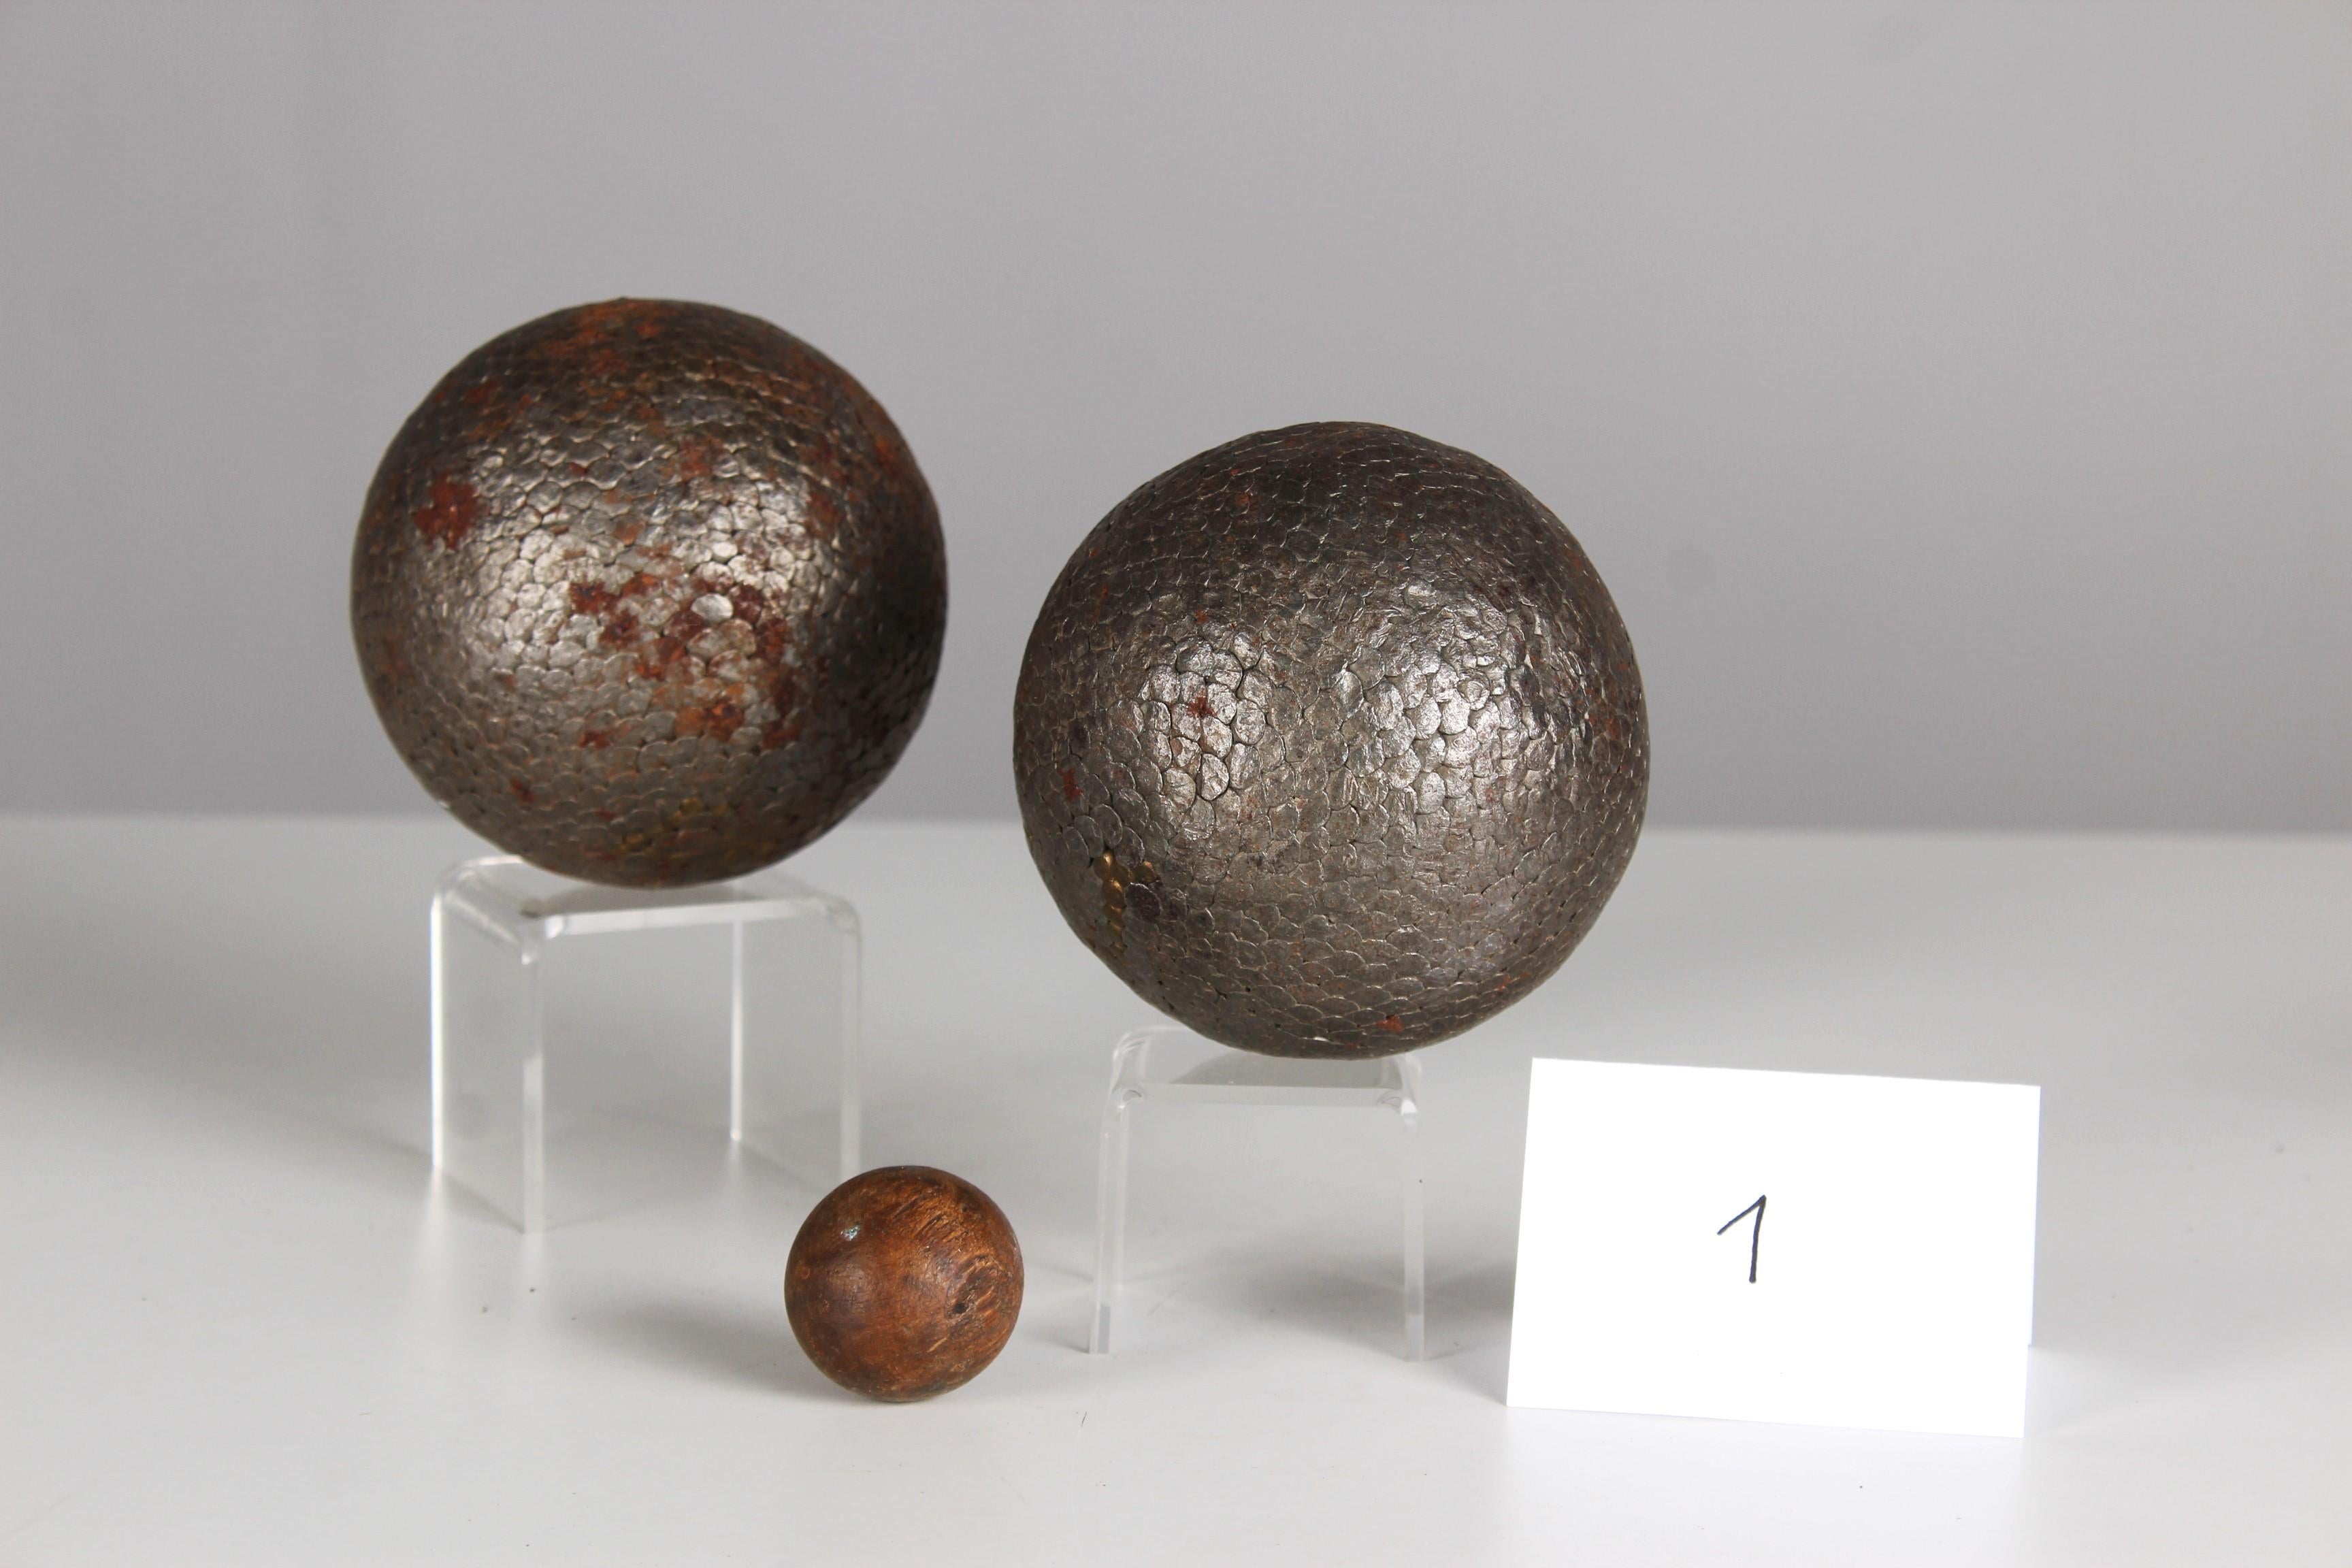 Beautiful, unique Boule ball pair and one target ball, France, late 19th Century.

In the 19th century, the manufacture of boules balls underwent significant development in France as the game of boules, particularly the pétanque variant, gained in